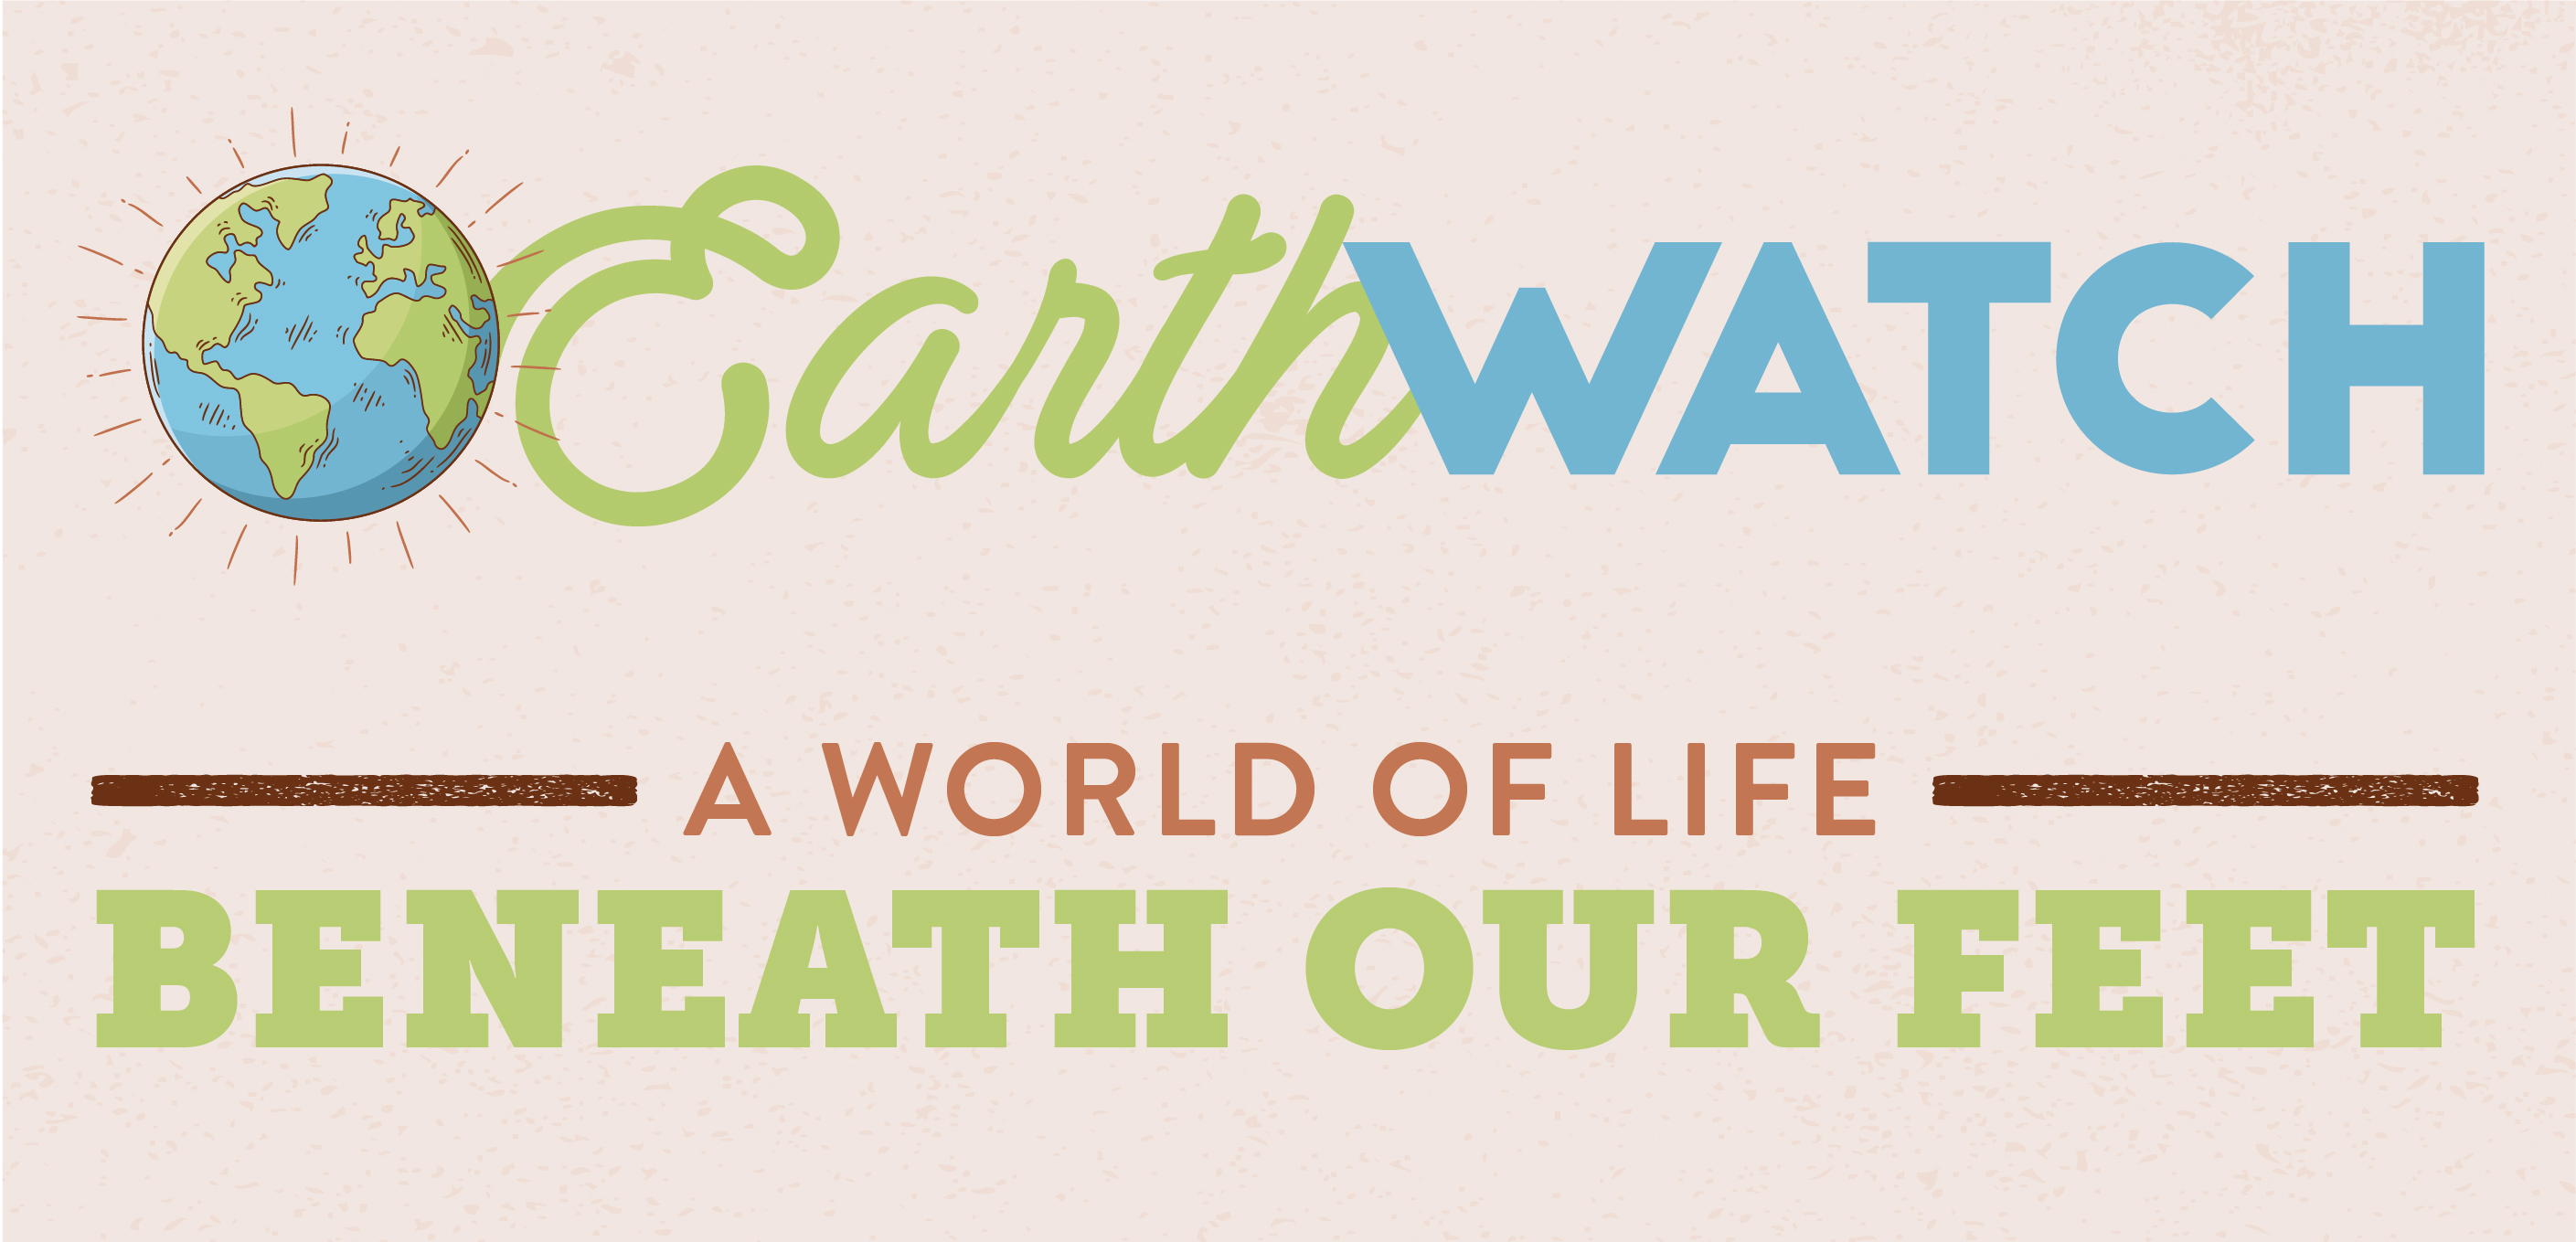 Earth Watch: The World of Life Beneath Our Feet